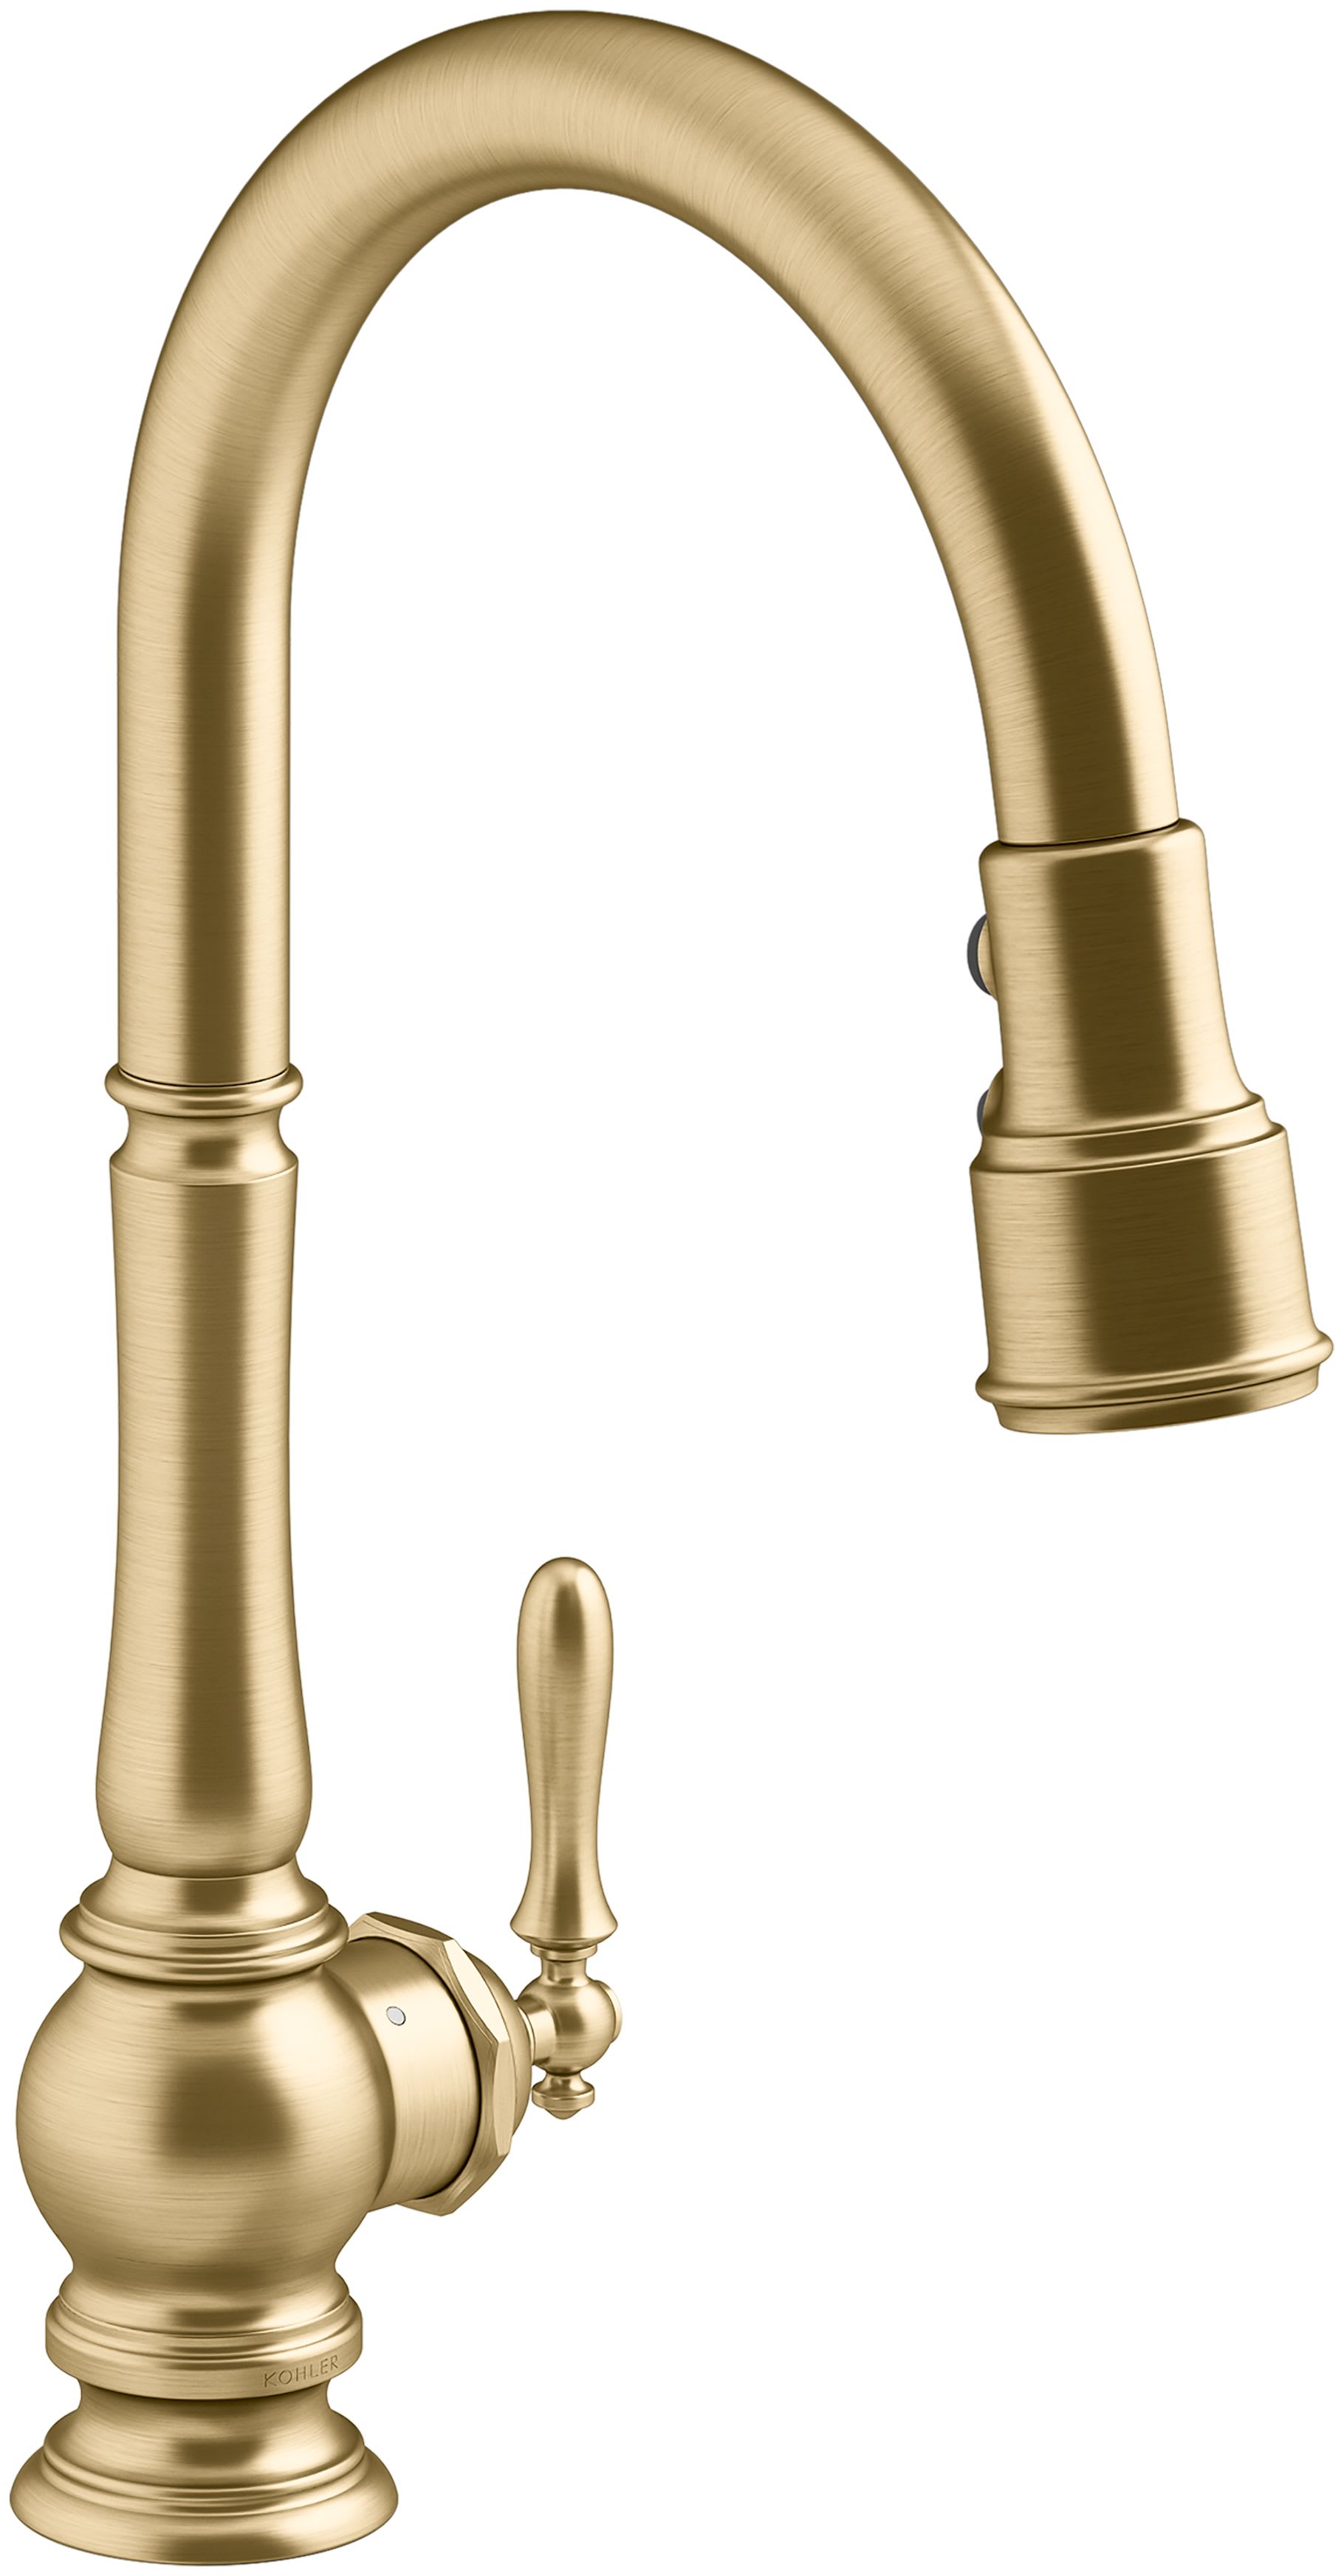 Kohler K 29709 2mb Vibrant Brushed Moderne Brass Artifacts 1 5 Gpm Single Hole Pull Down Kitchen Faucet Faucetdirect Com